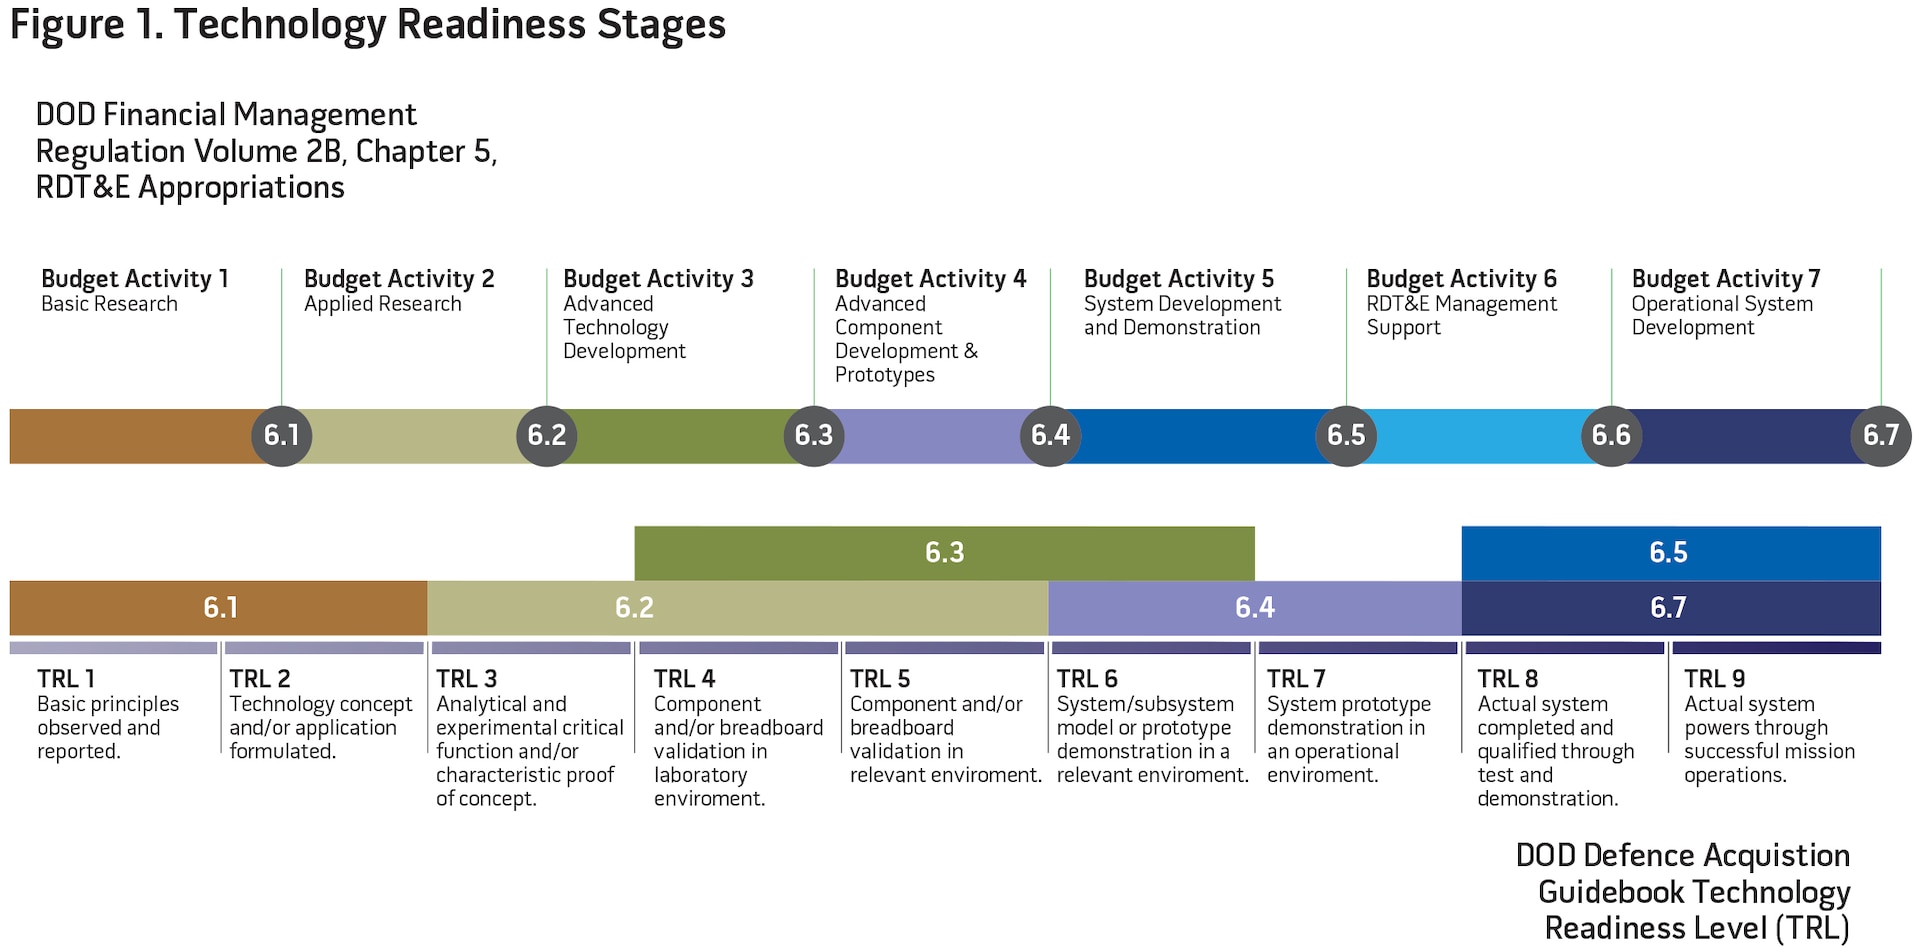 Figure 1. Technology Readiness Stages